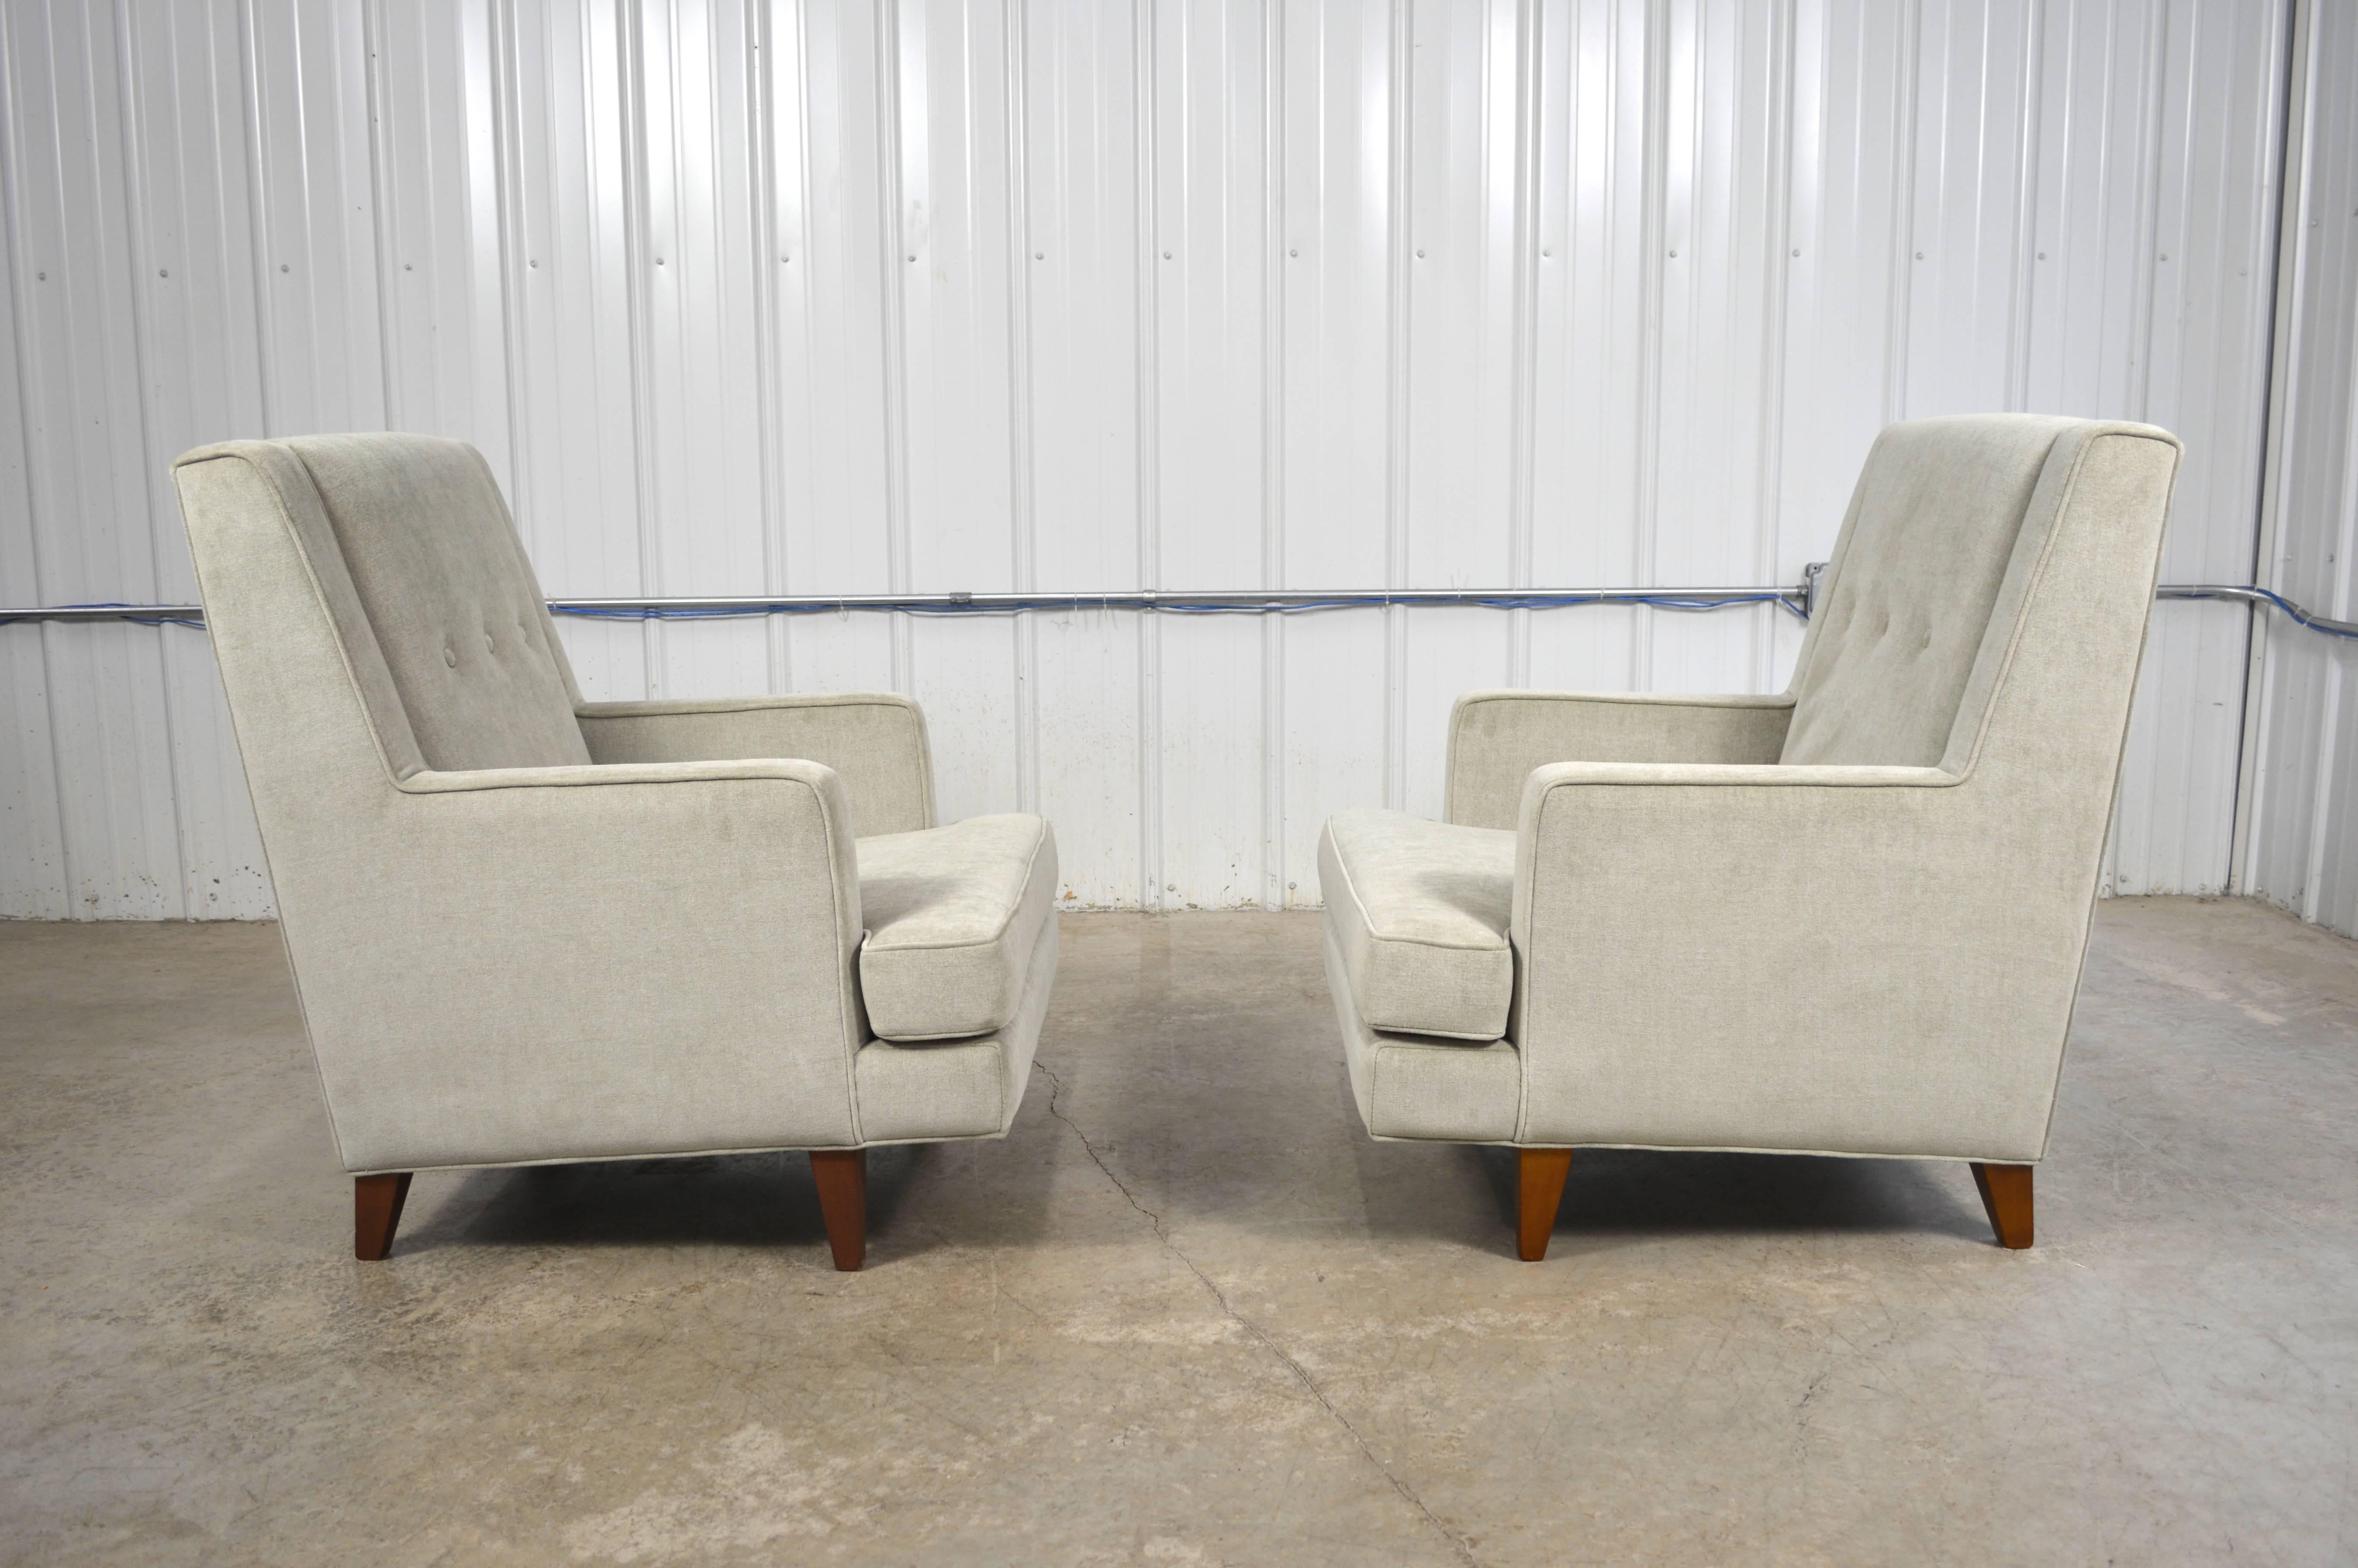 A pair of "Tall Man" lounge chairs by Edward Wormley for Dunbar. Newly restored and upholstered in a neutral fabric.